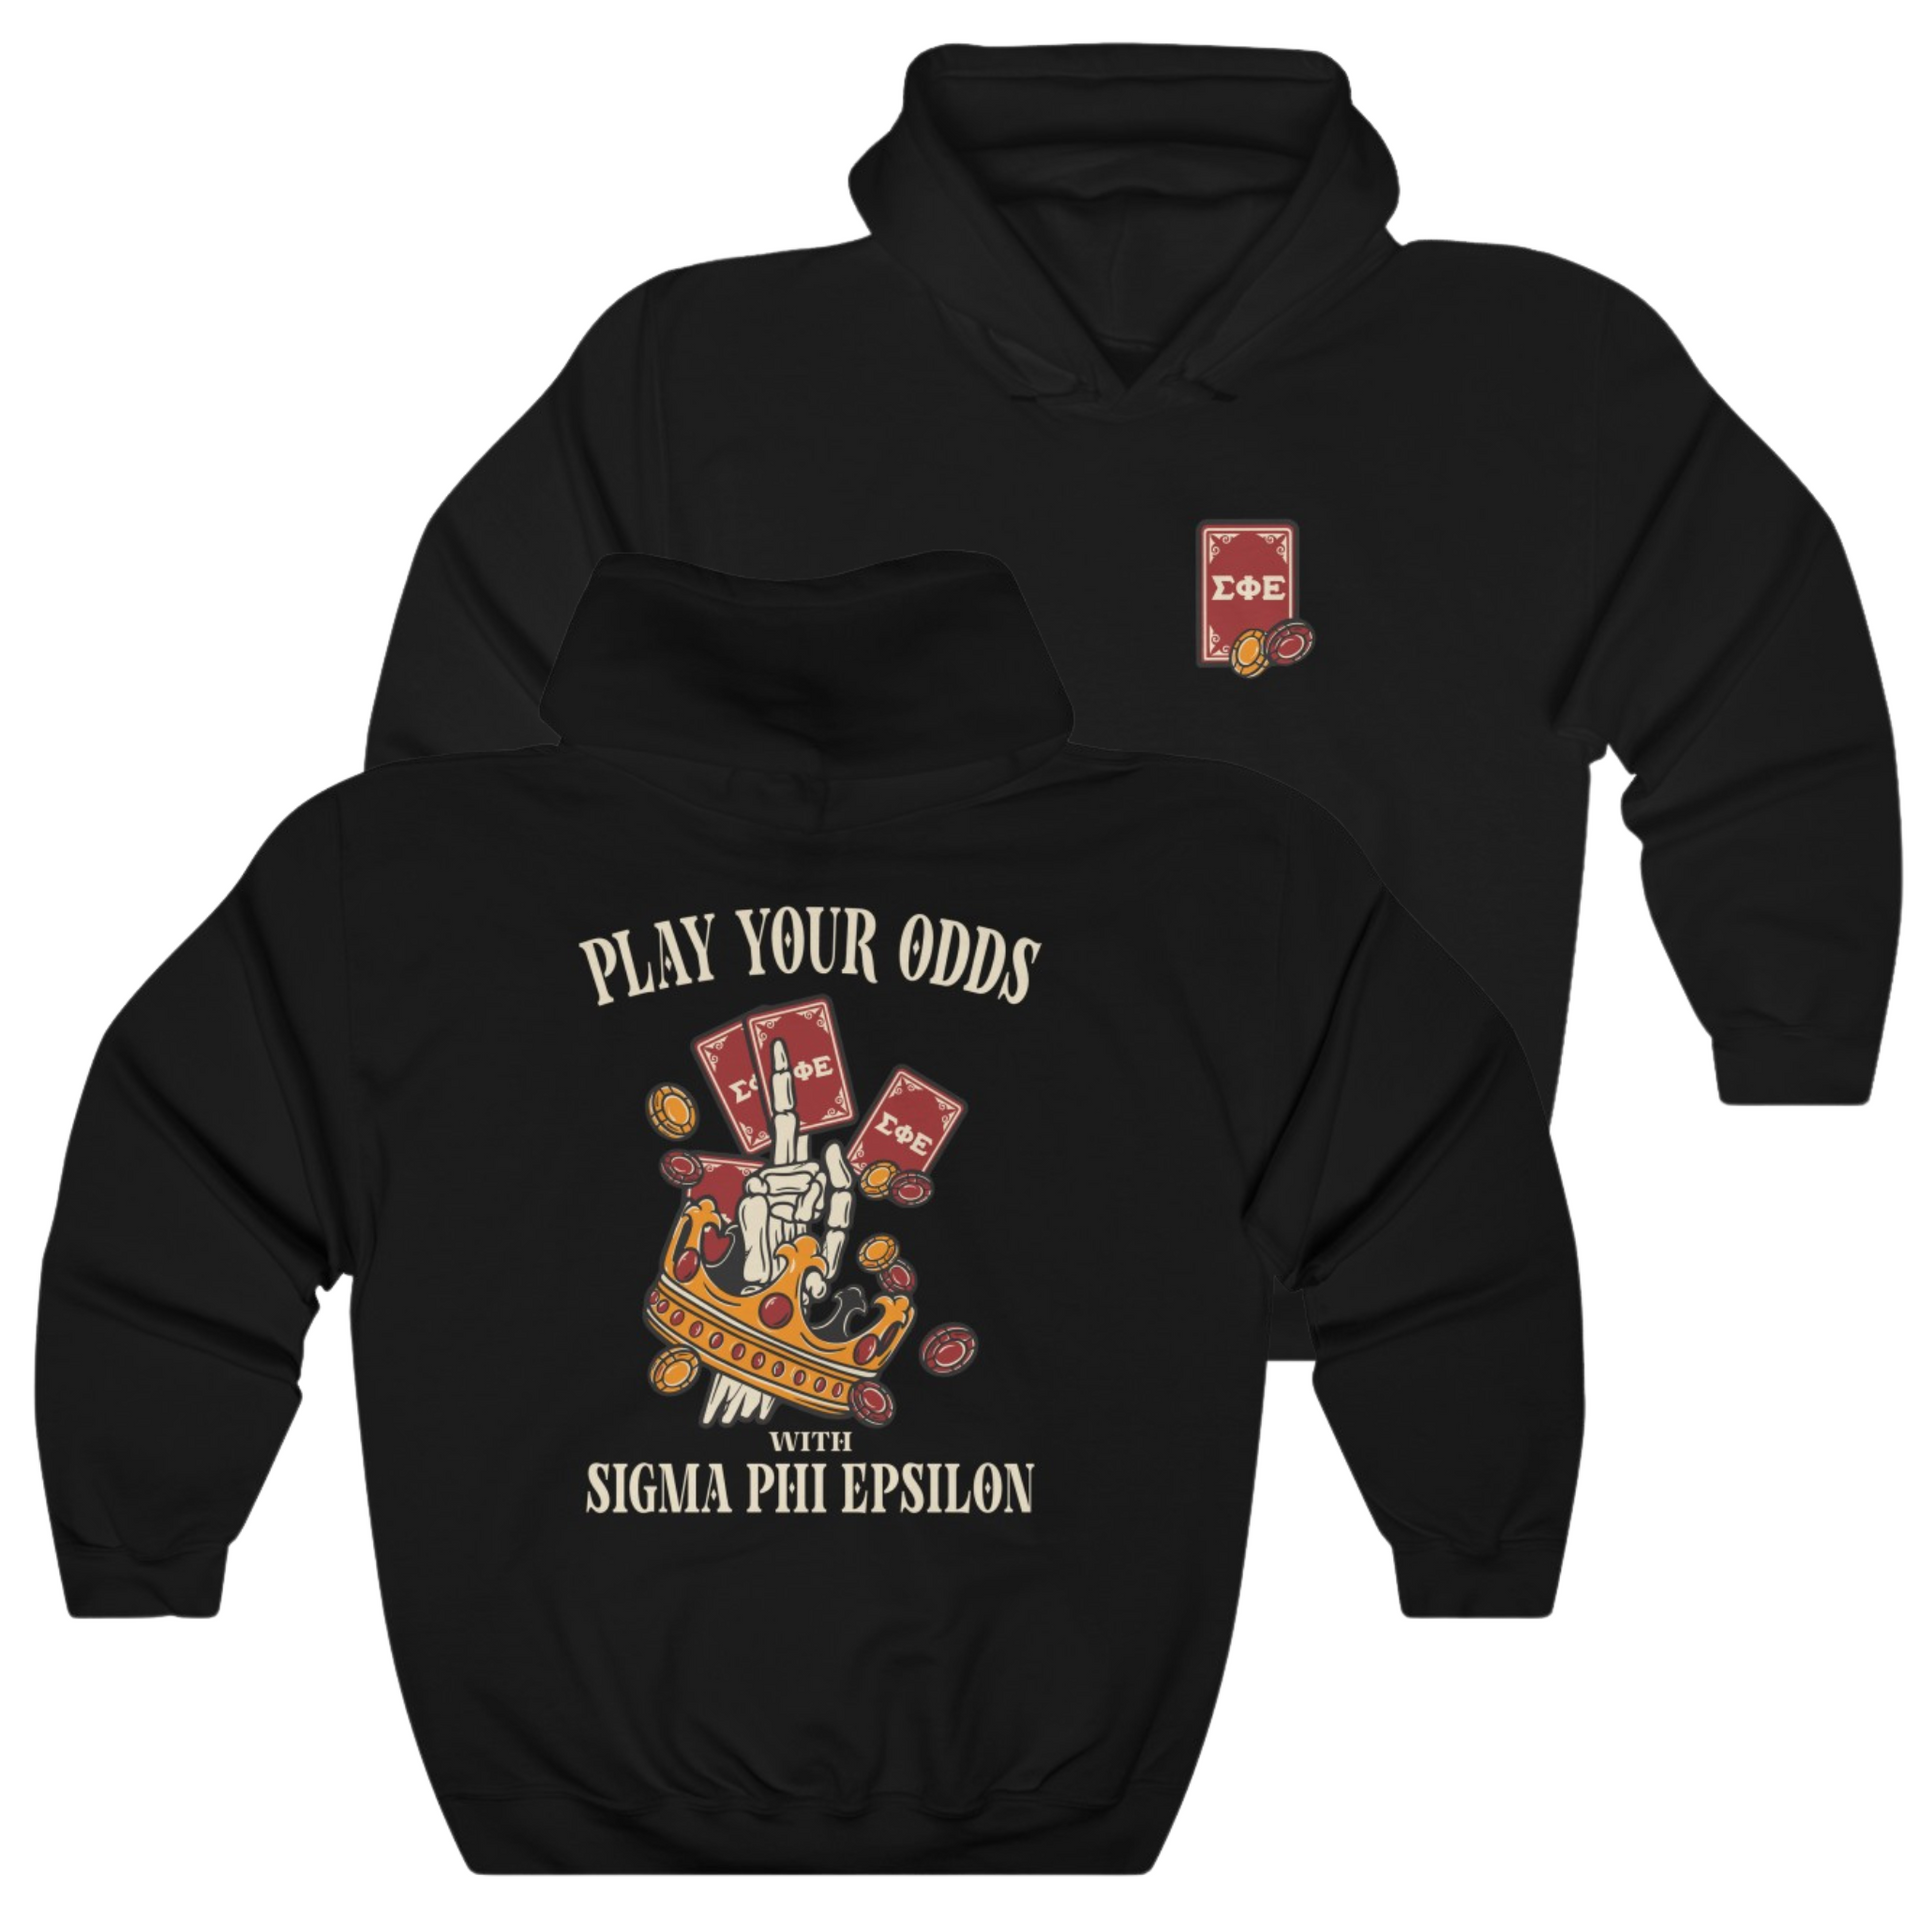 Black Sigma Phi Epsilon Graphic Hoodie | Play Your Odds | SigEp Clothing - Campus Apparel